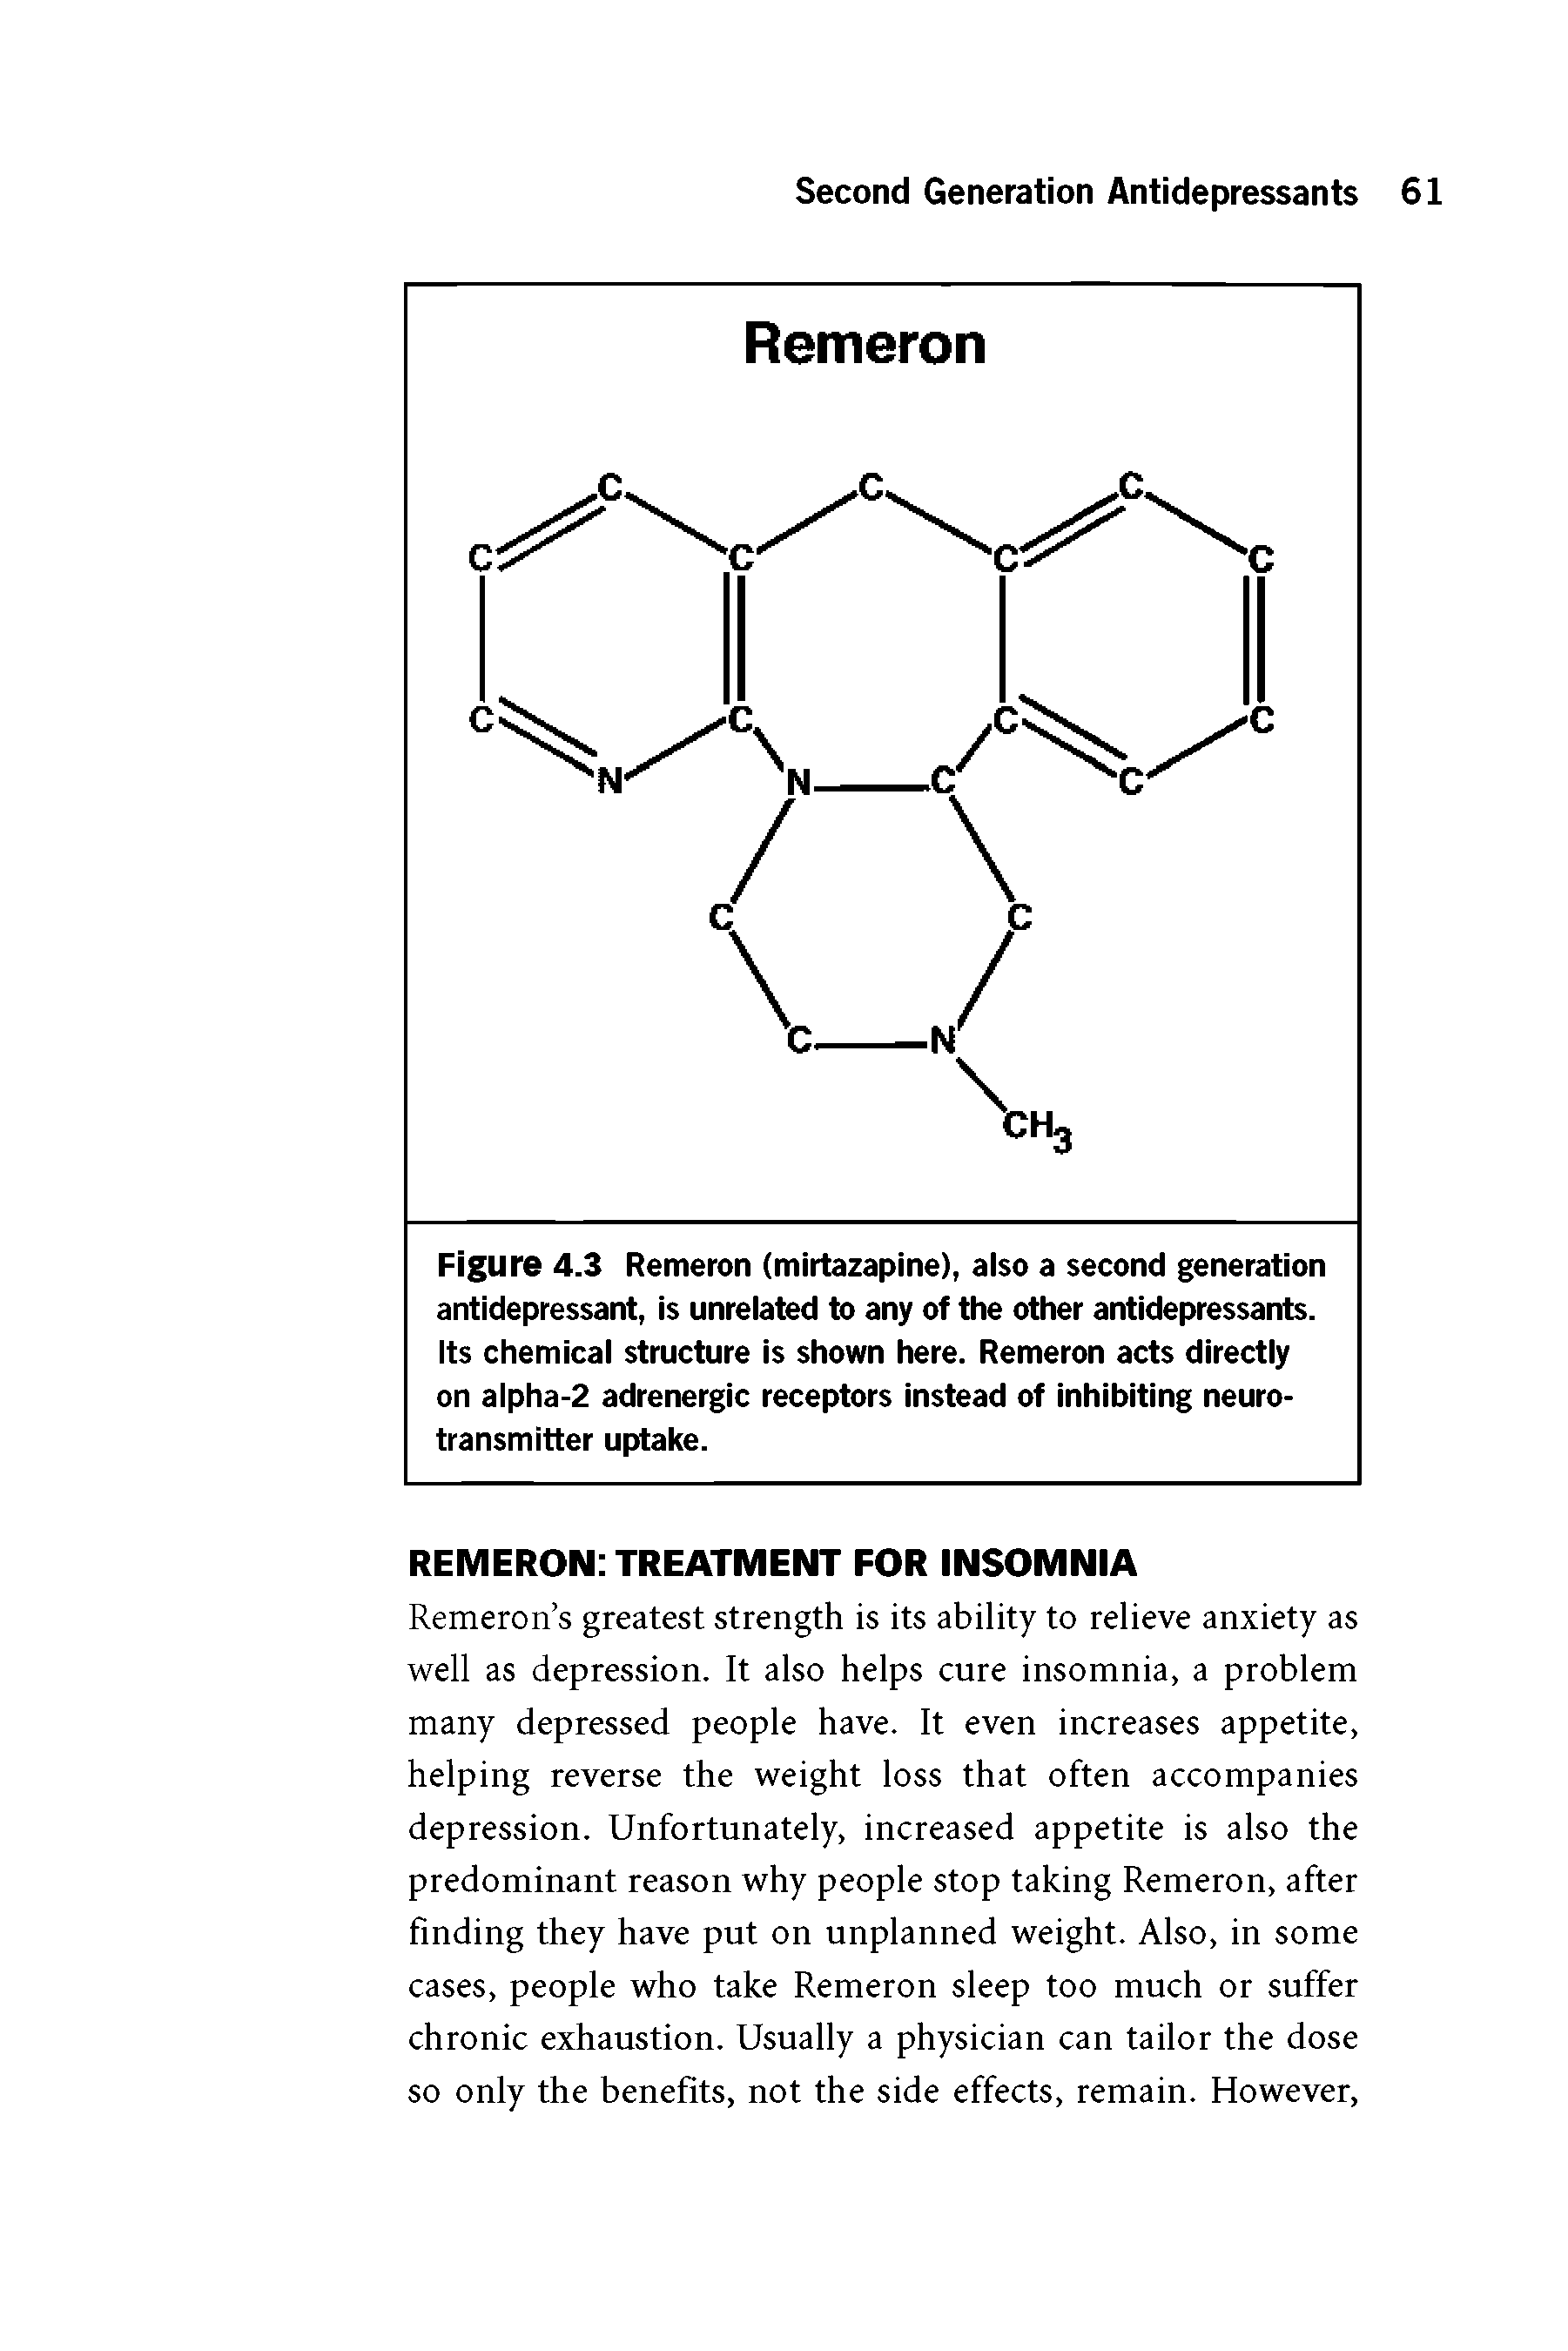 Figure 4.3 Remeron (mirtazapine), also a second generation antidepressant, is unrelated to any of the other antidepressants. Its chemical structure is shown here. Remeron acts directly on alpha-2 adrenergic receptors instead of inhibiting neurotransmitter uptake.